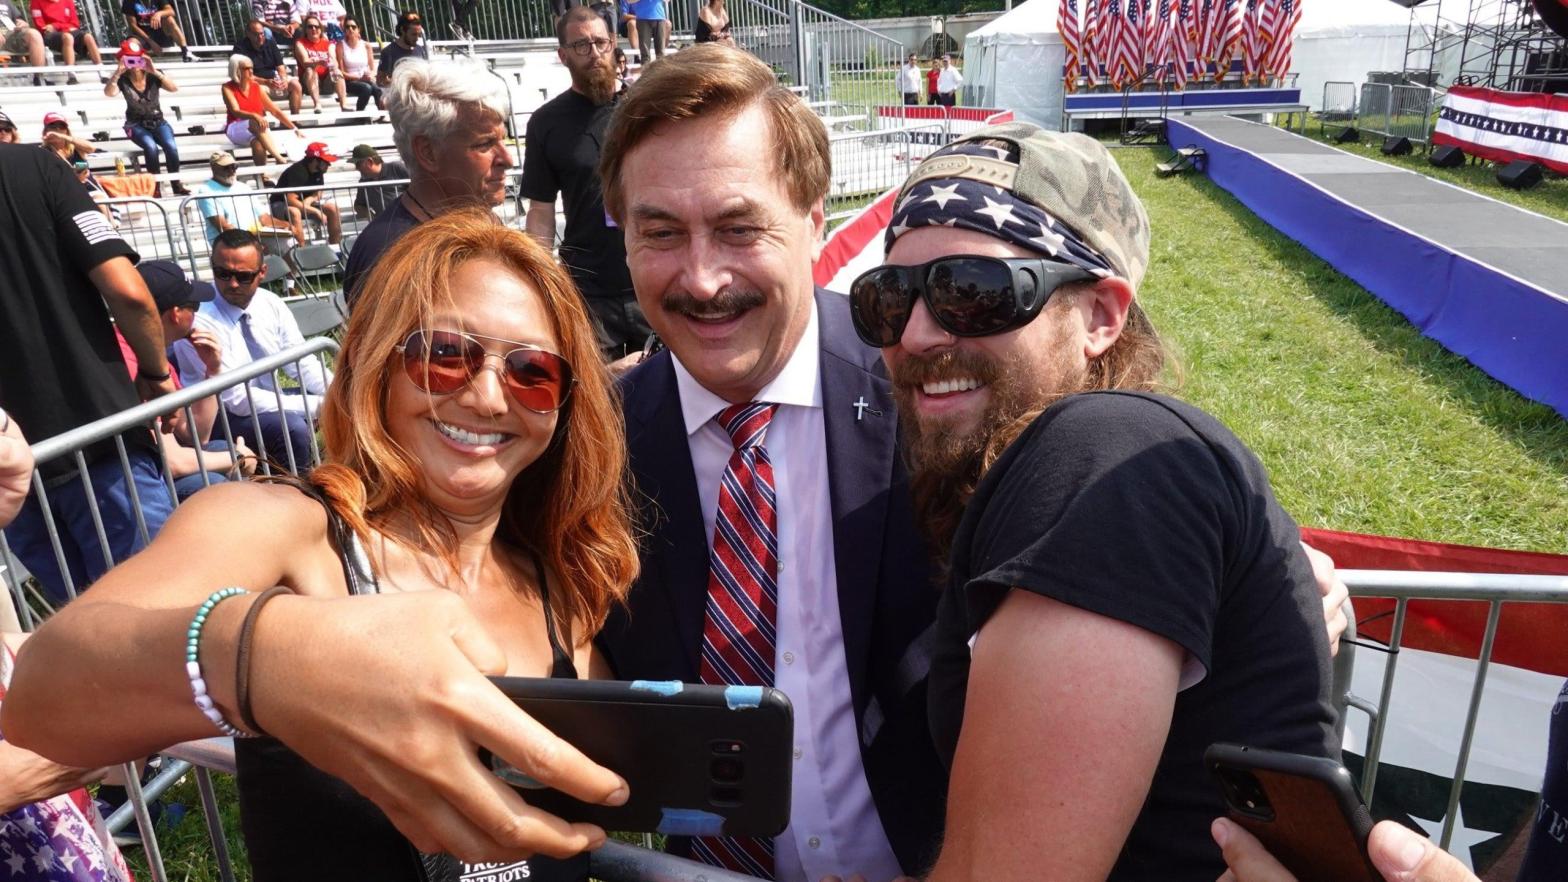 Mike Lindell, the CEO of MyPillow, taking selfies with Donald Trump supporters before a rally in Wellington, Ohio on June 26, 2021. (Photo: Scott Olson, Getty Images)